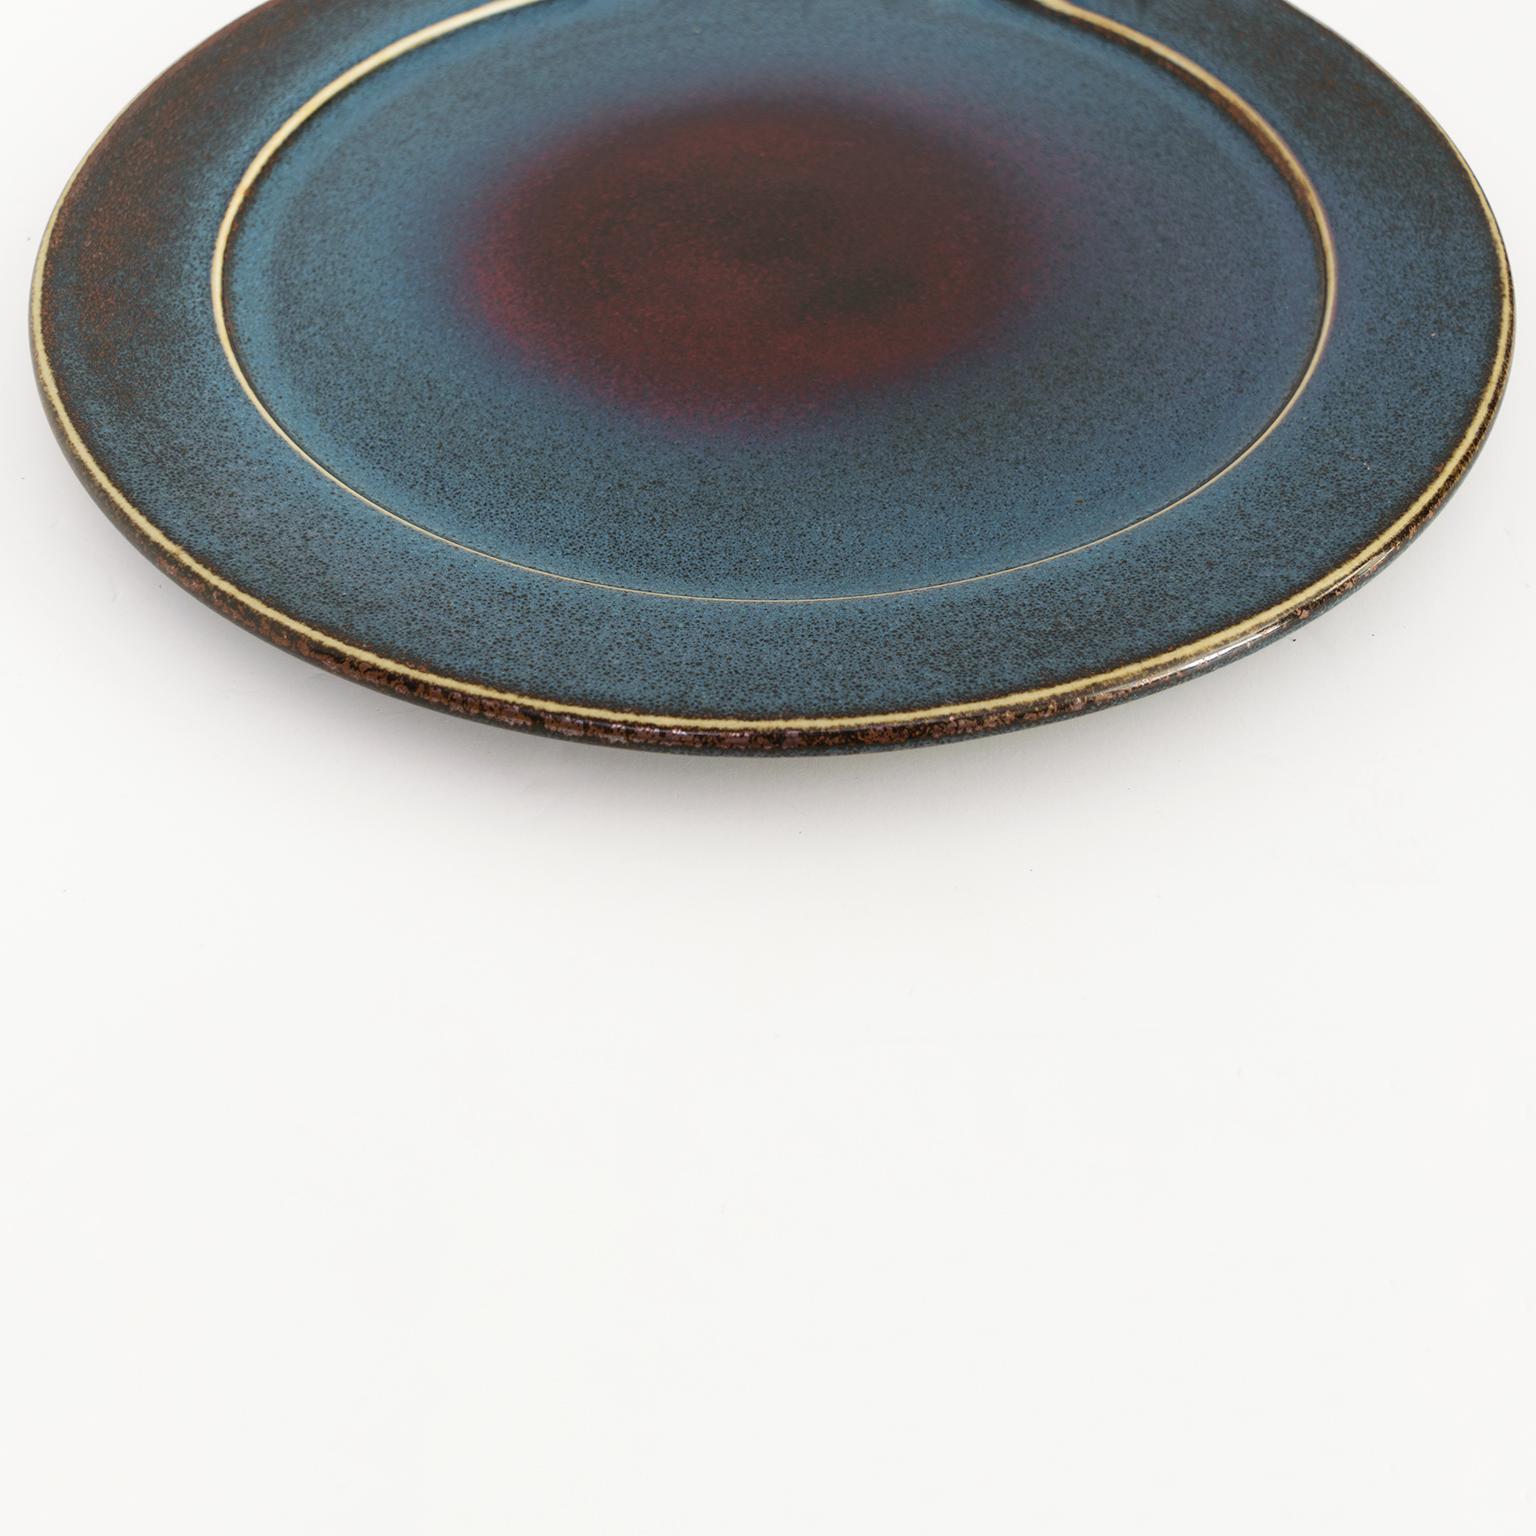 Stig Lindberg Scandinavian Modern Ceramic Charger, Gustavsberg, 1980 In Good Condition For Sale In New York, NY